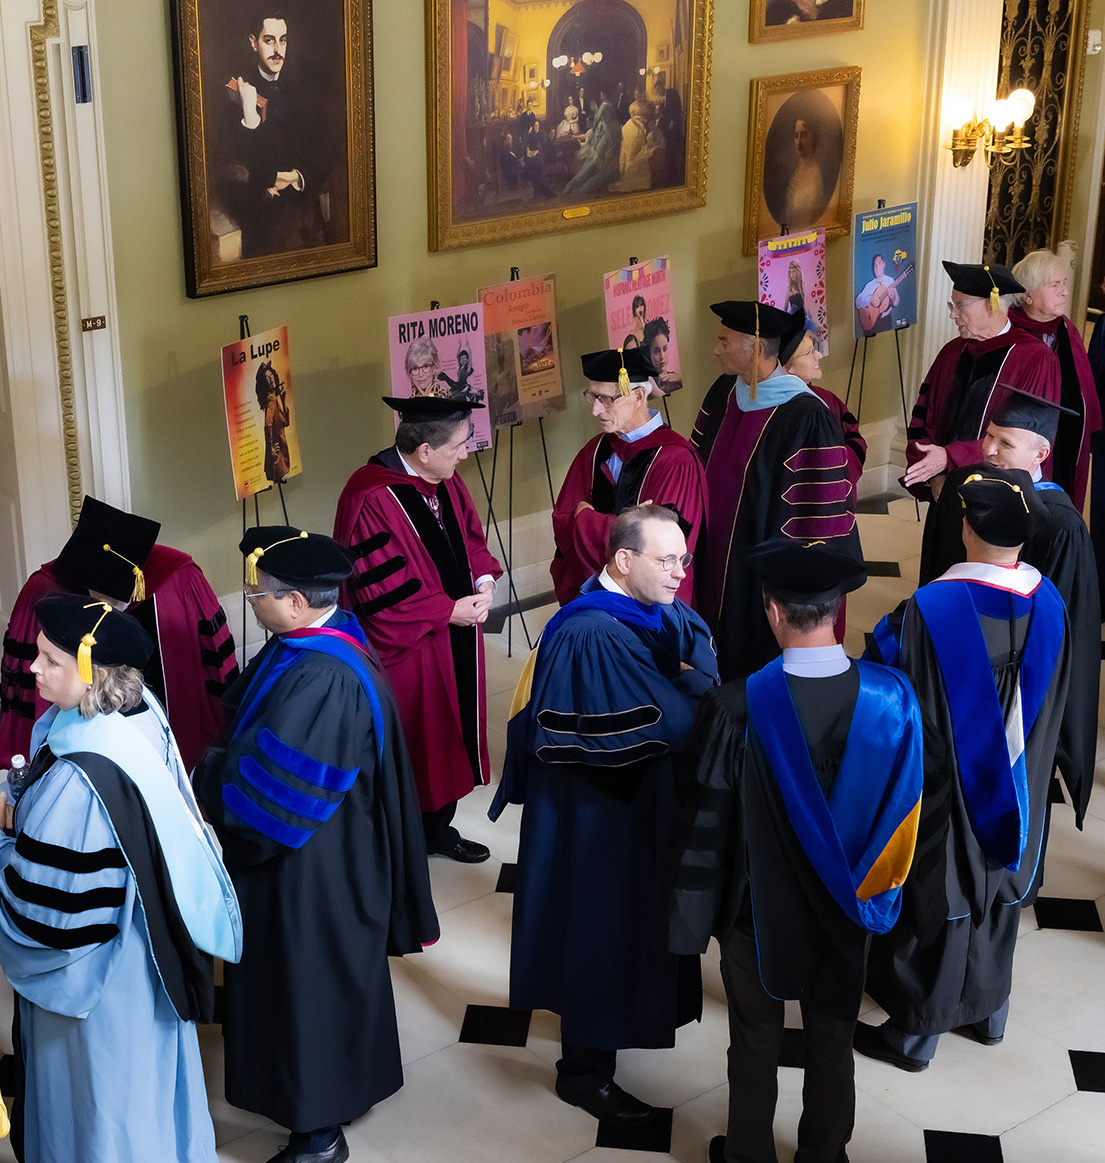 Faculty and administrators dressed in academic regalia mingle as they wait for convocation and inauguration to begin.